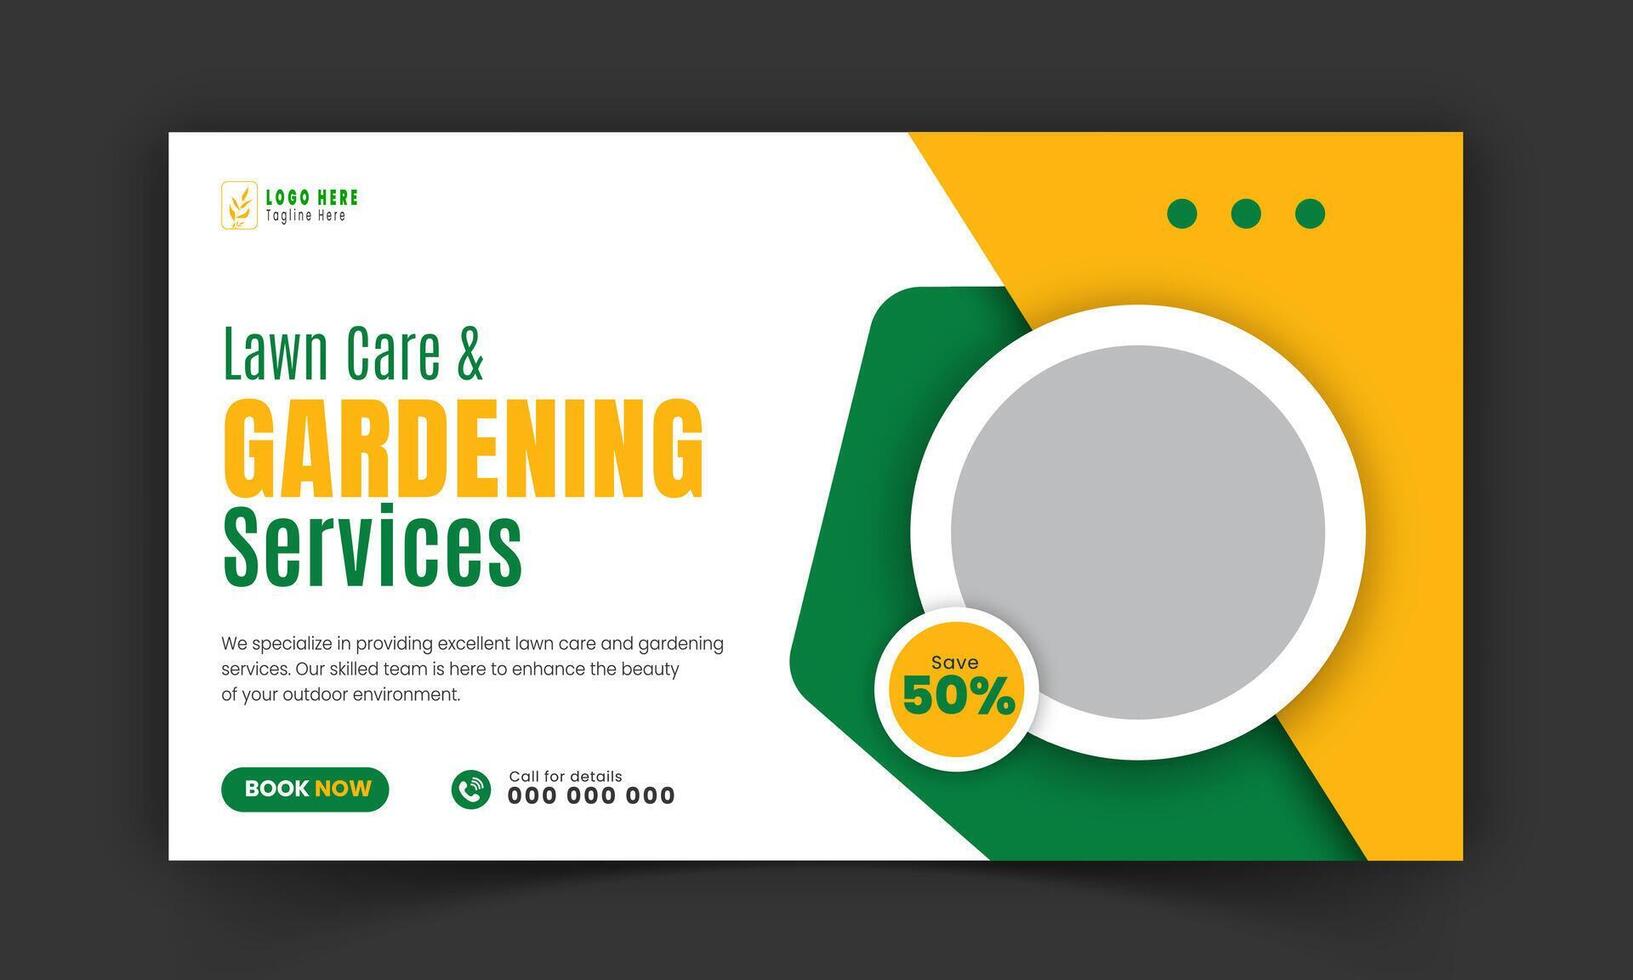 Corporate lawn care and gardening or landscaping service live stream video thumbnail design, lawn mower, gardening, promotion, web banner, template, abstract green and yellow color shapes vector